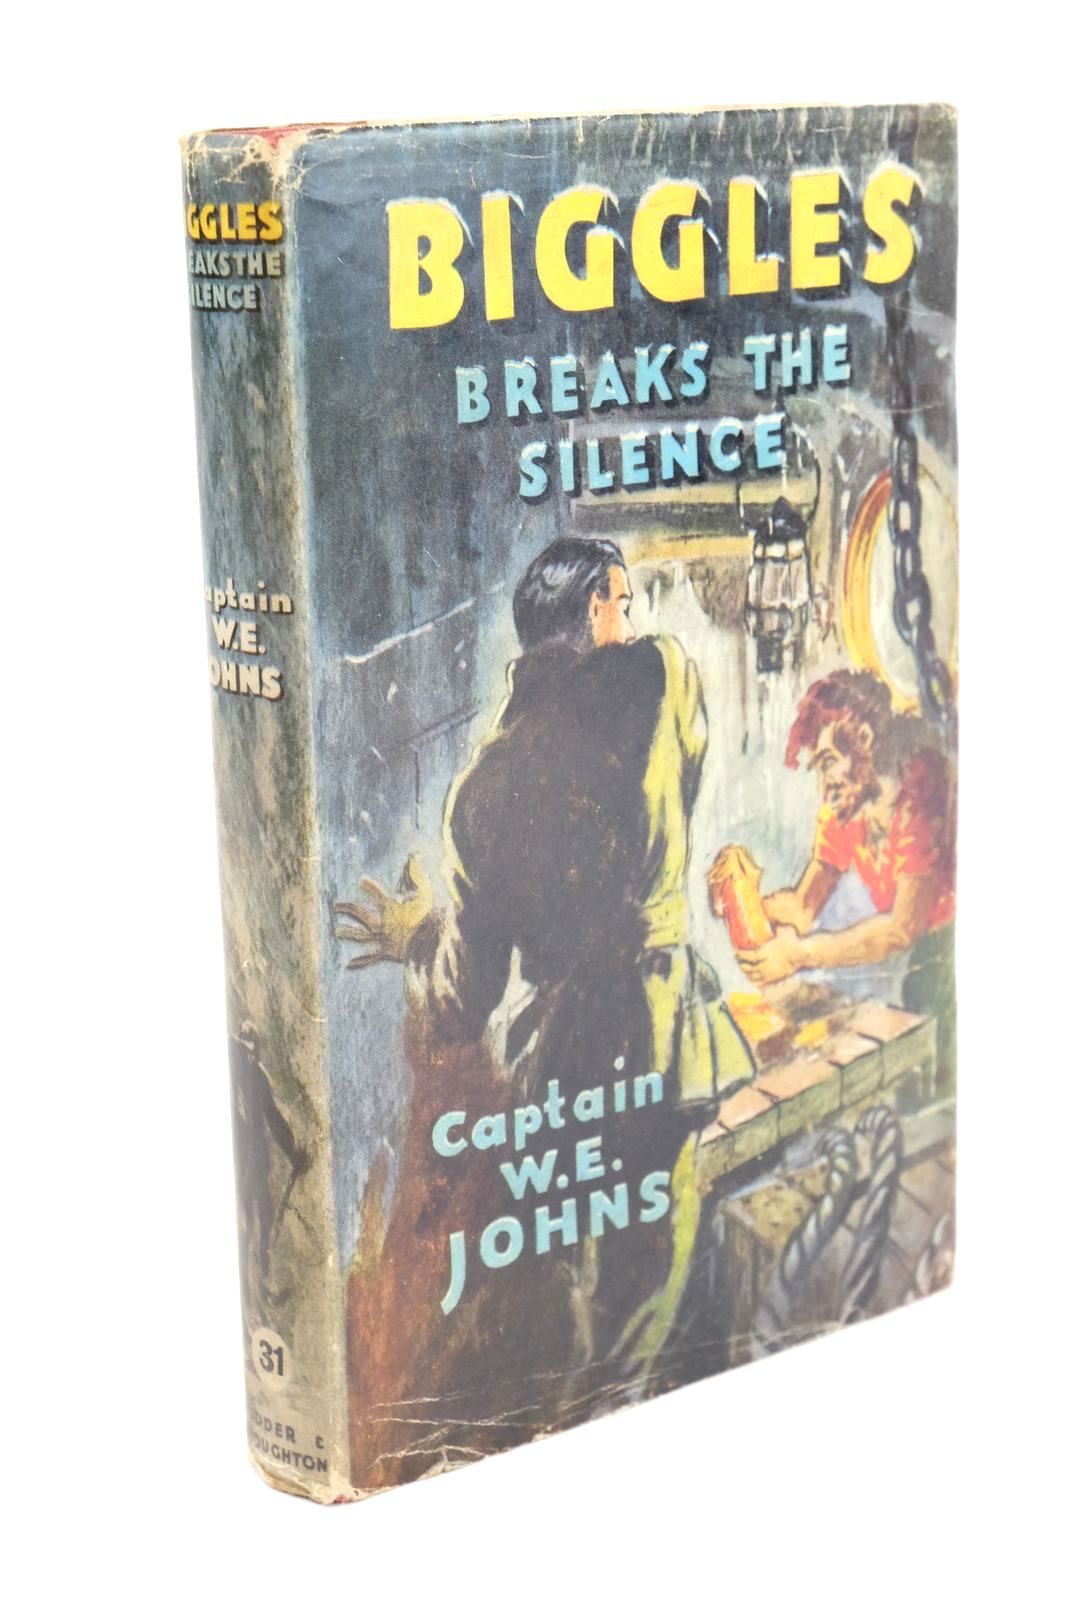 Photo of BIGGLES BREAKS THE SILENCE written by Johns, W.E. illustrated by Stead,  published by Hodder & Stoughton (STOCK CODE: 1324857)  for sale by Stella & Rose's Books